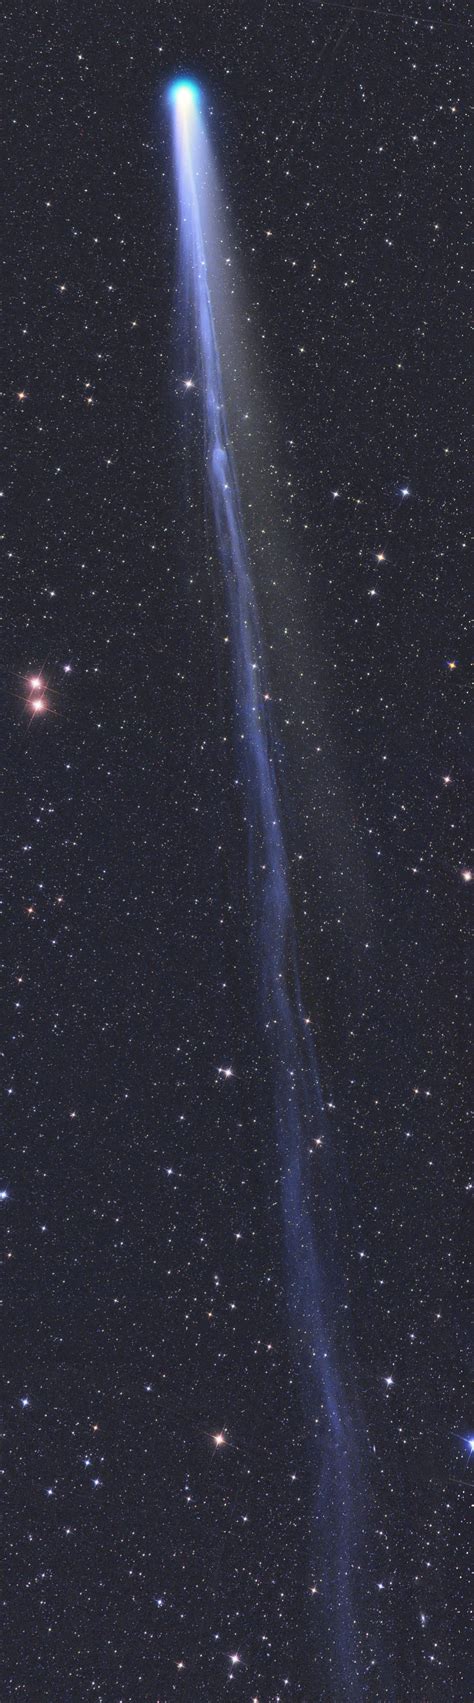 Next Week Comet Lovejoy Makes Its Closest Approach To The Sun The